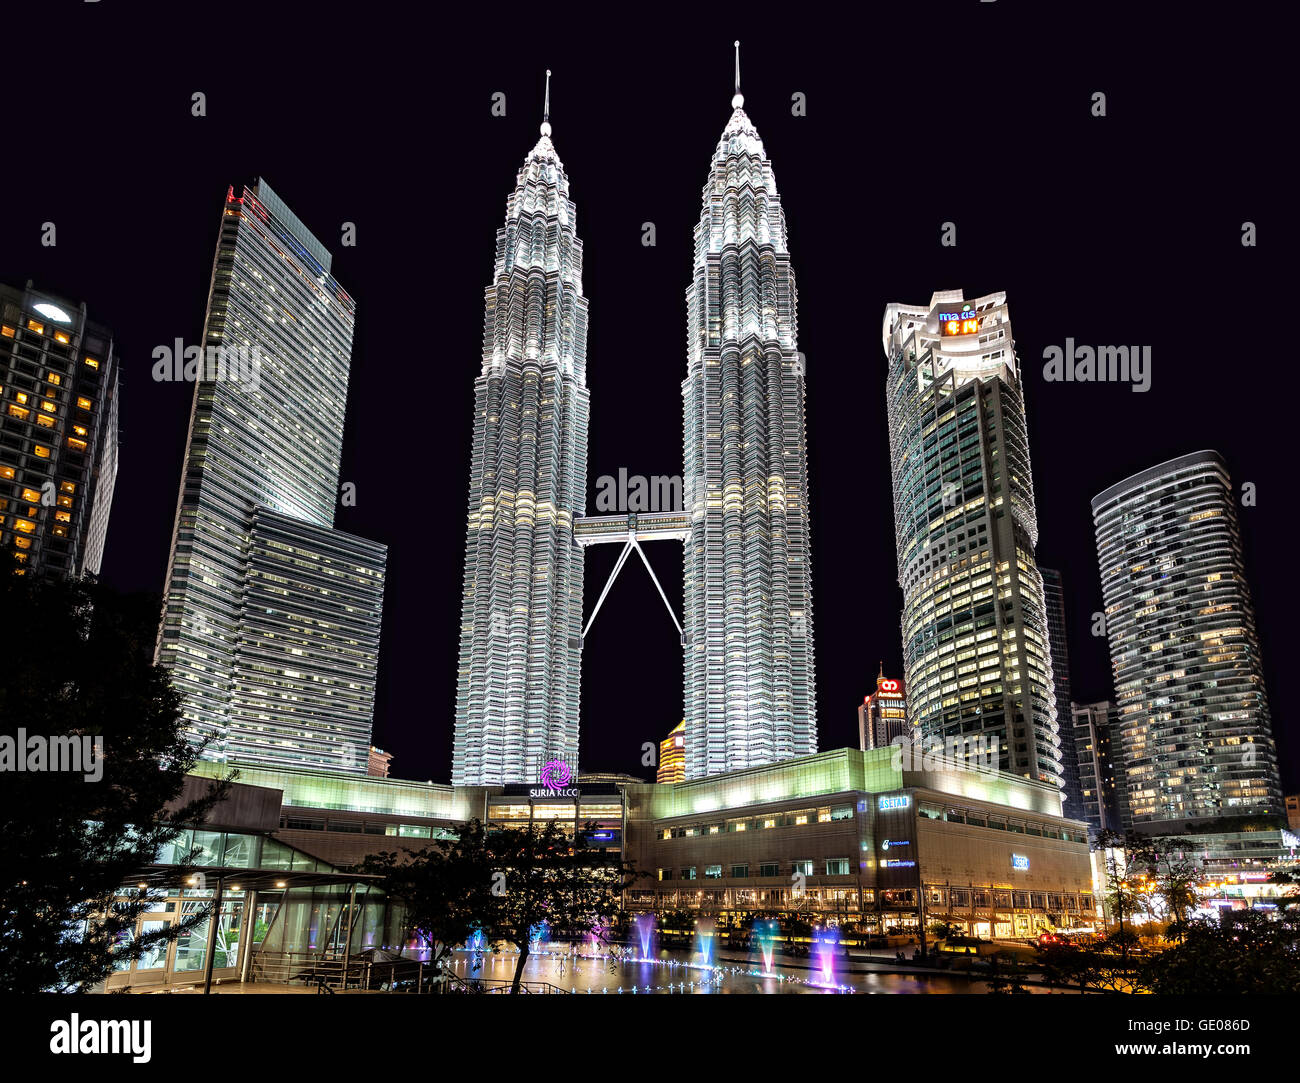 The Petronas Twin Towers at night, the world's tallest twin towers. Stock Photo